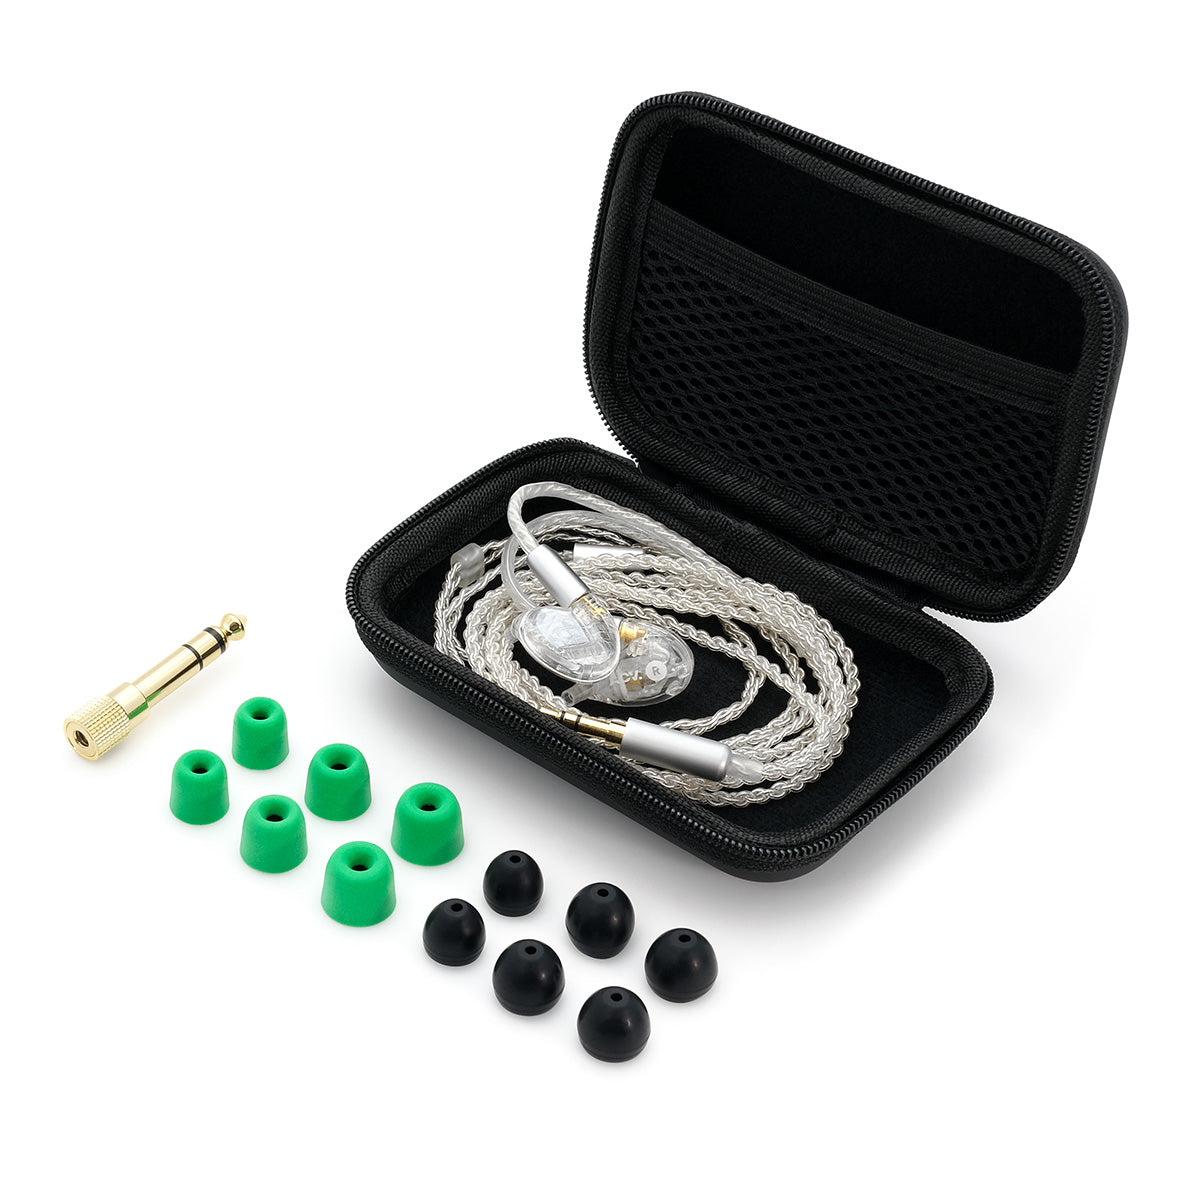 ADV. Model 3 Live In-ear Monitor for Musicians and Professionals MMCX #edition_live